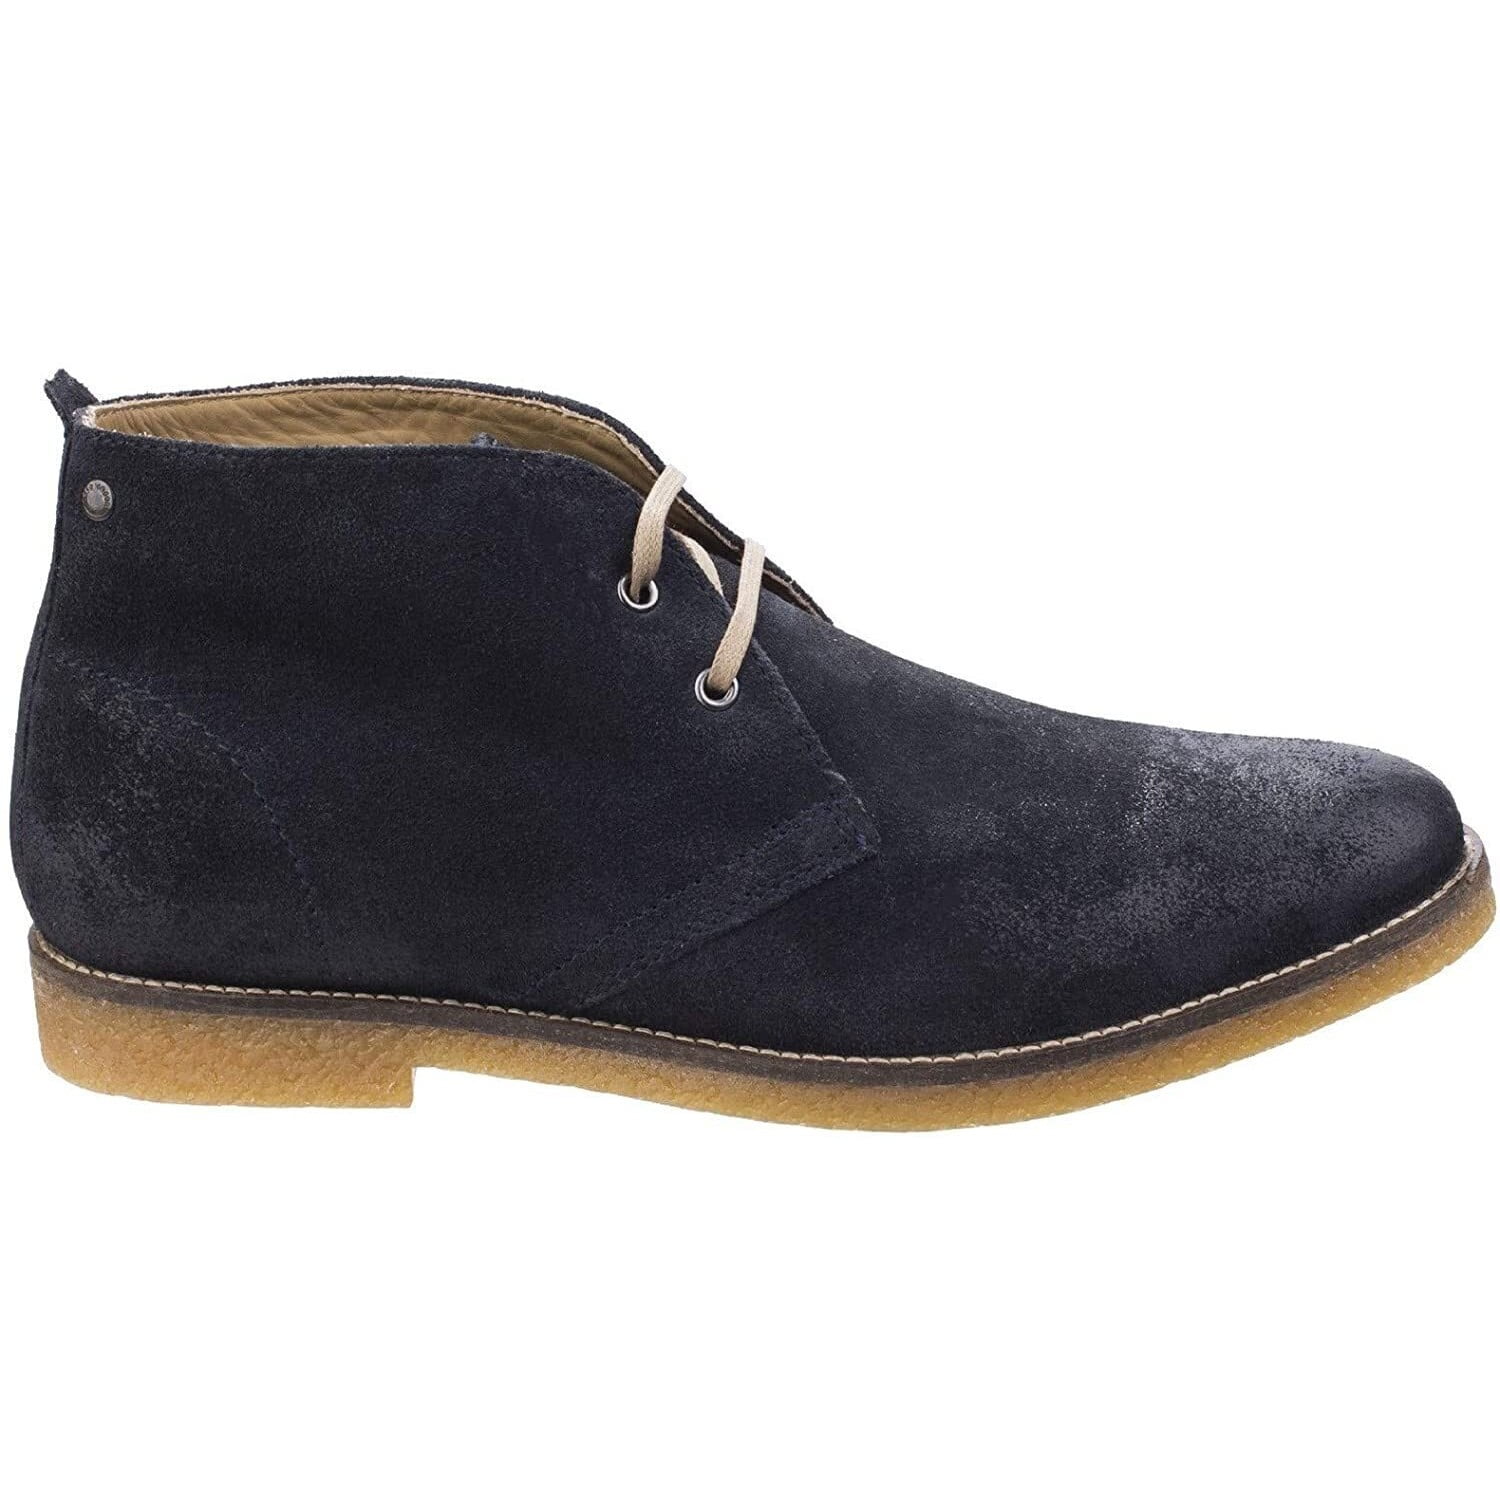 Base London PERRY Mens Burnished Suede Leather Casual Lace Up Desert Boots Blue 